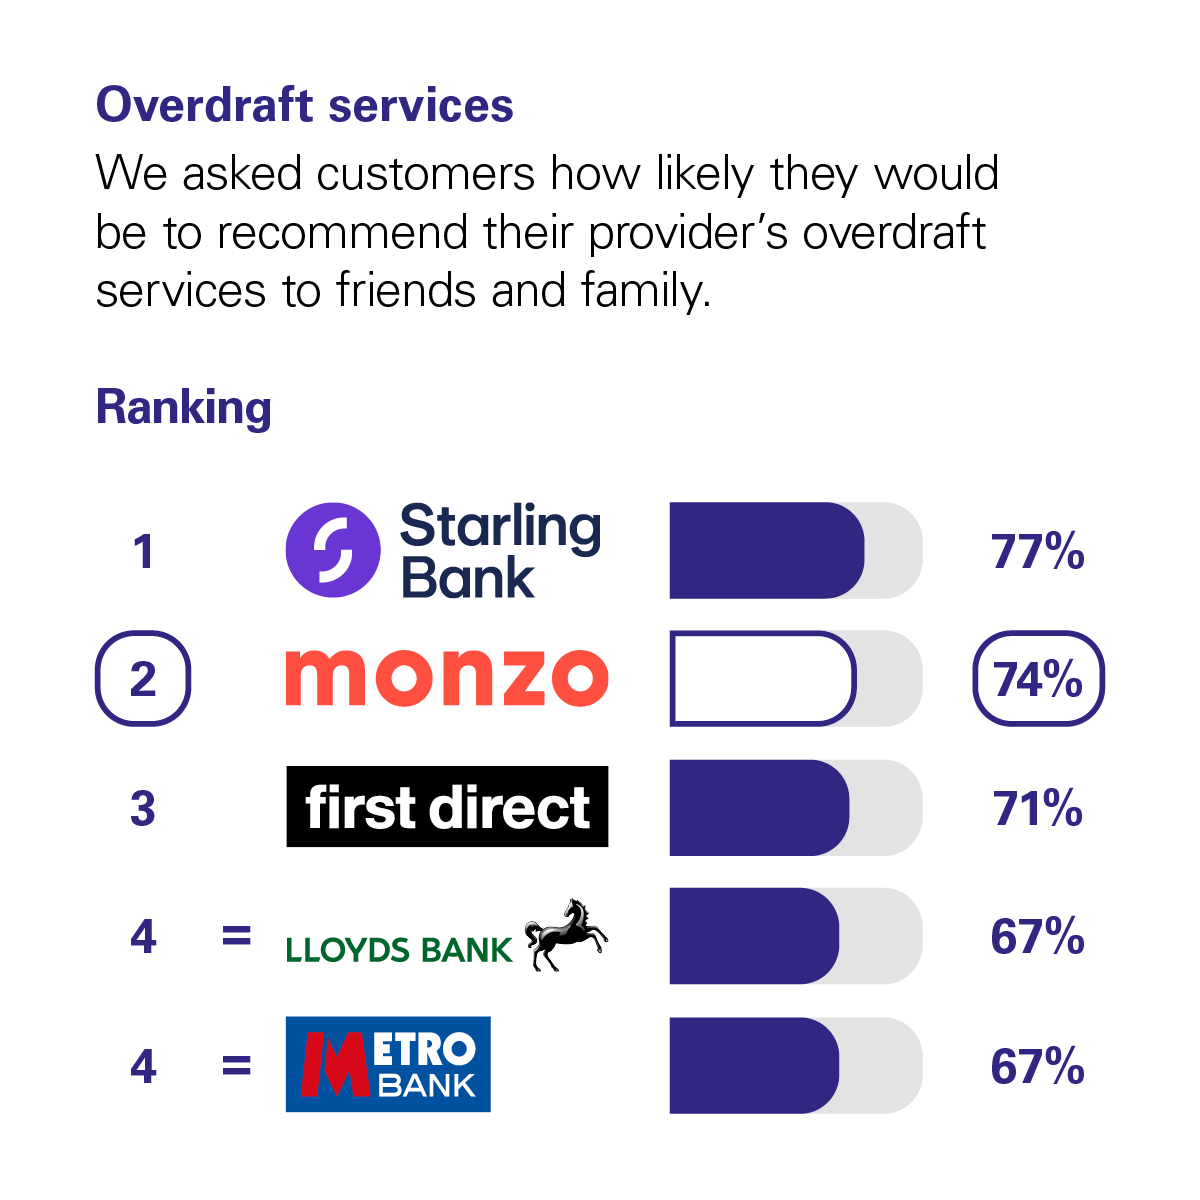 Graph showing the results of the CMA scoring of UK banks in the Overdraft Services category. The CMA asked customers how likely they would be to recommend their provider's overdraft services to friends and family. The rankings with percentage scores are: 1st Starling Bank with 77%. 2nd Monzo with 74%. 3rd First Direct with 71%. Joint 4th Lloyds Bank and Metric Bank with 67%.